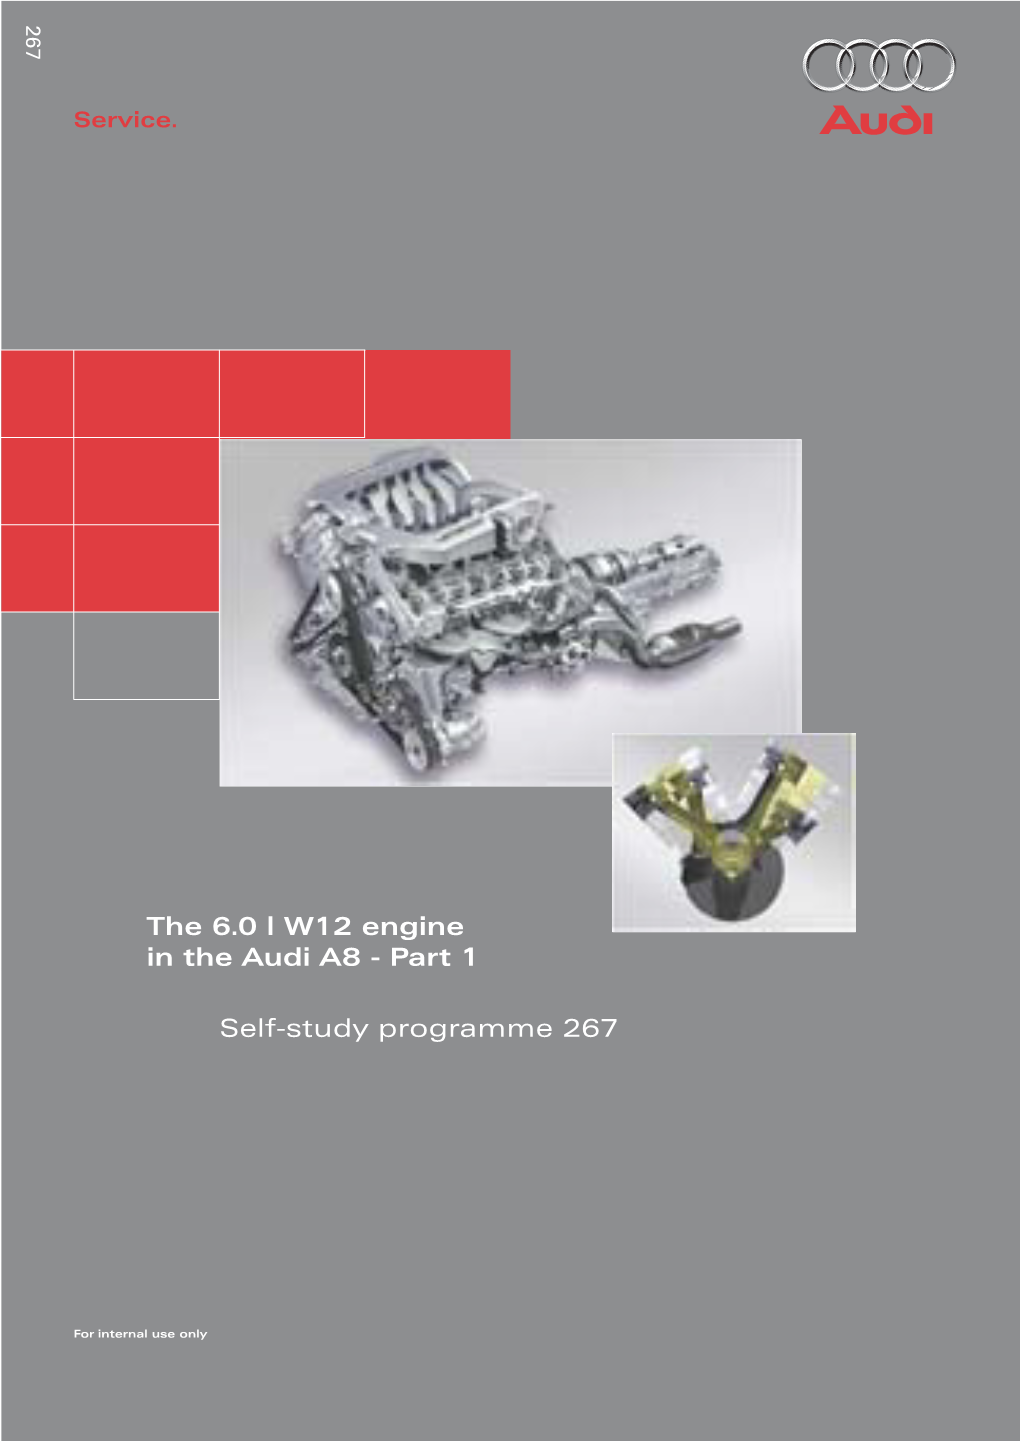 Self-Study Programme 267 the 6.0 L W12 Engine in The